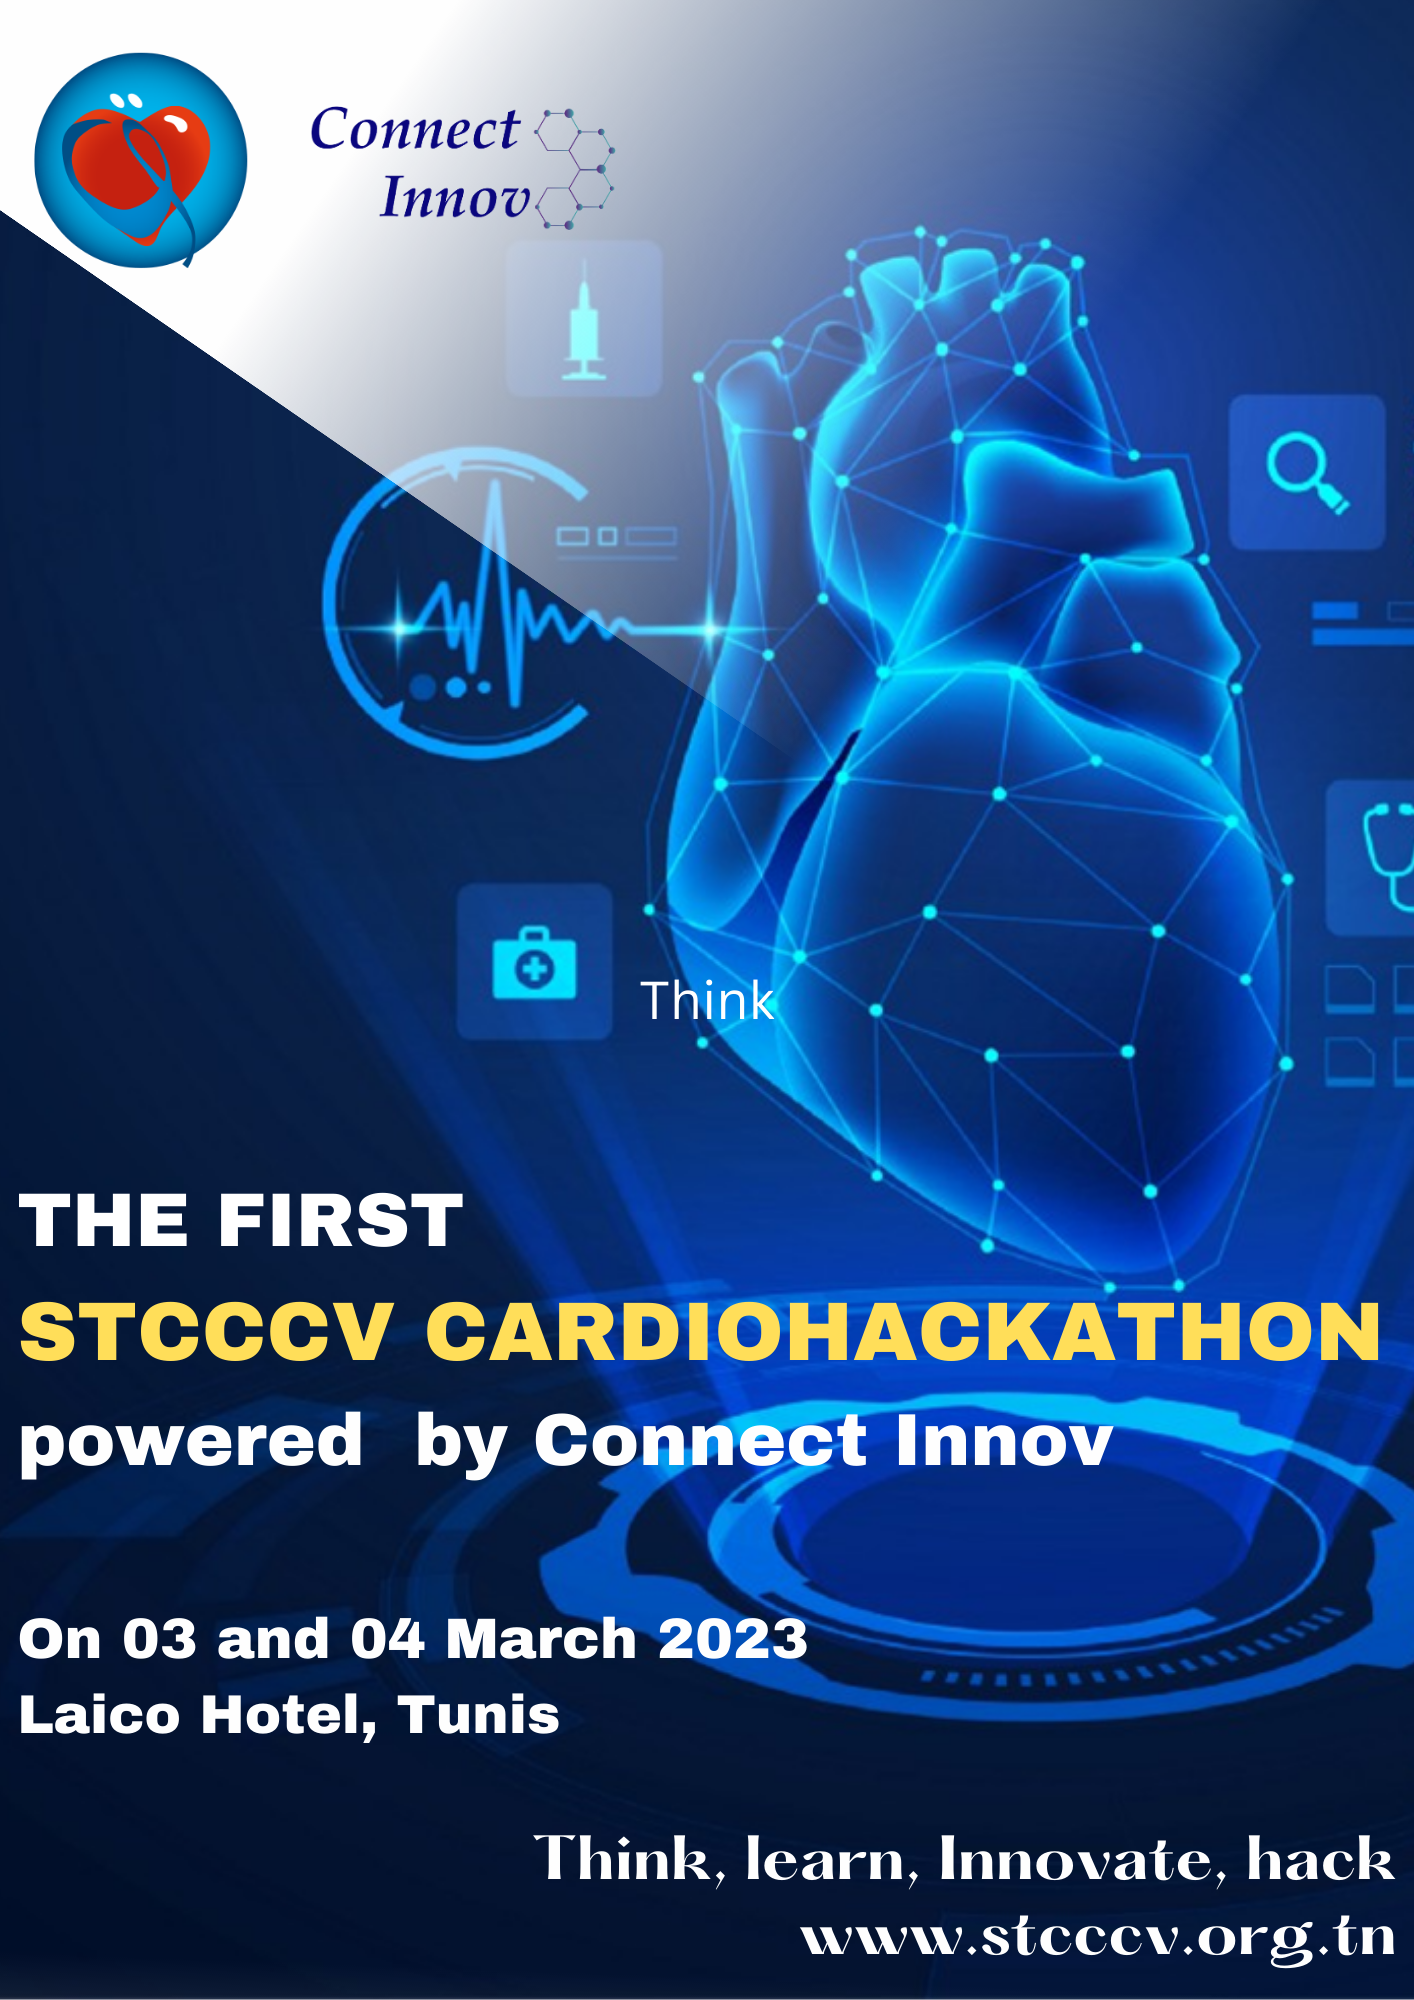 The first STCCCV Cardiohackathon (powered by Connect Innov)